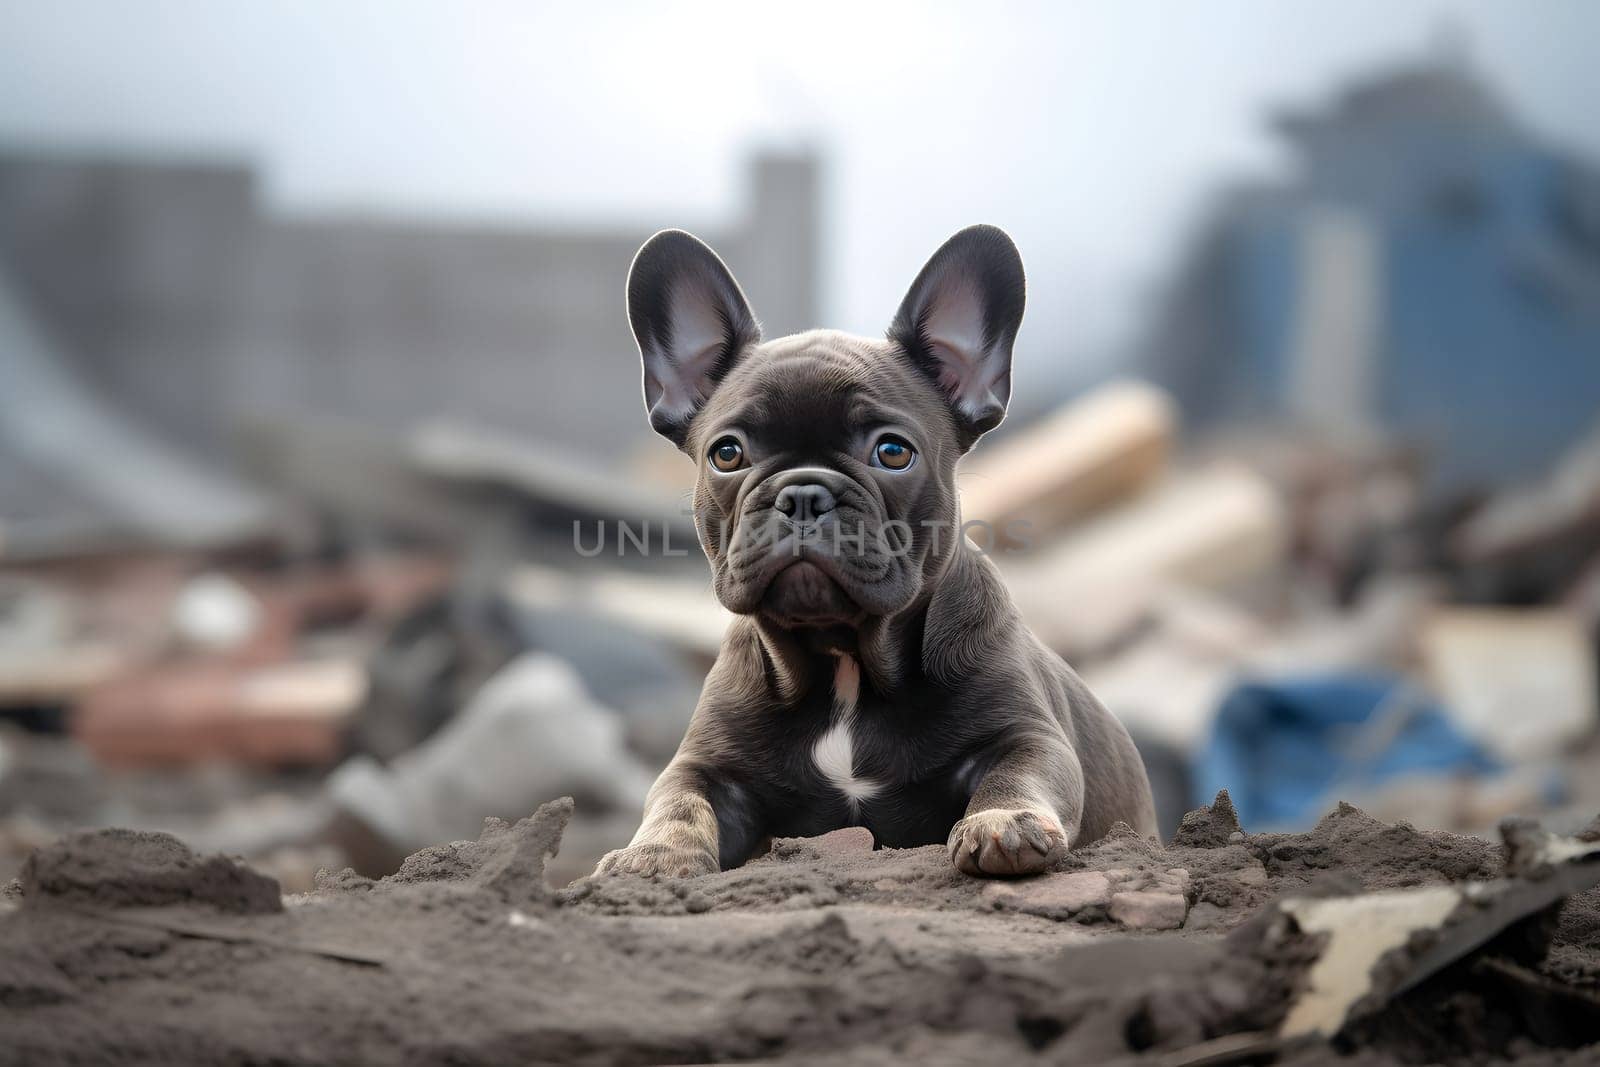 Alone and hungry young French Bulldog after disaster on the background of house rubble. Neural network generated image. Not based on any actual scene.